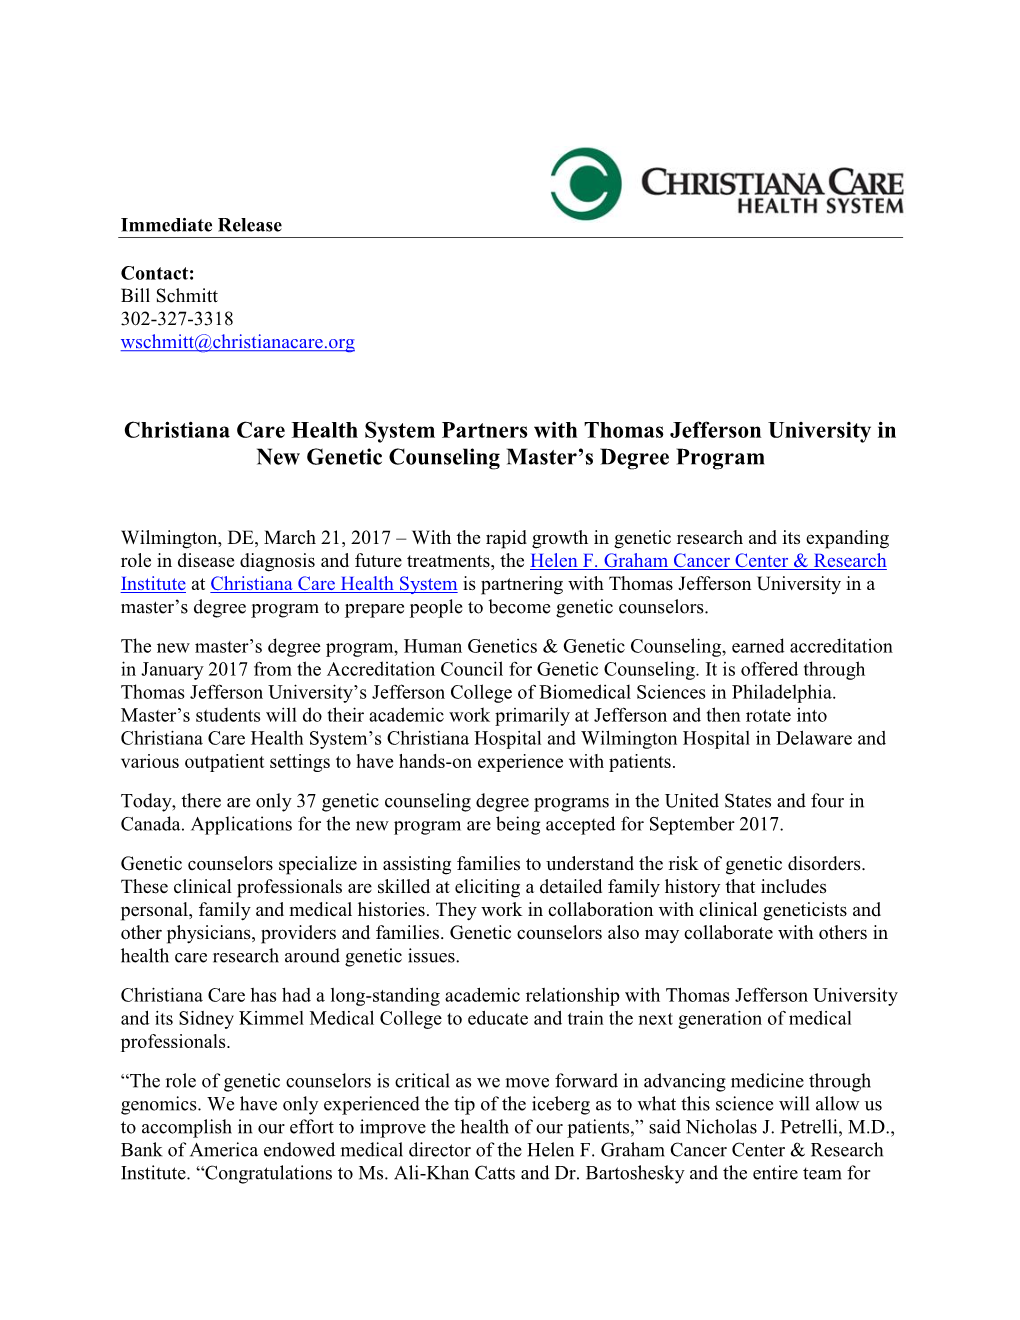 Christiana Care Health System Partners with Thomas Jefferson University in New Genetic Counseling Master’S Degree Program